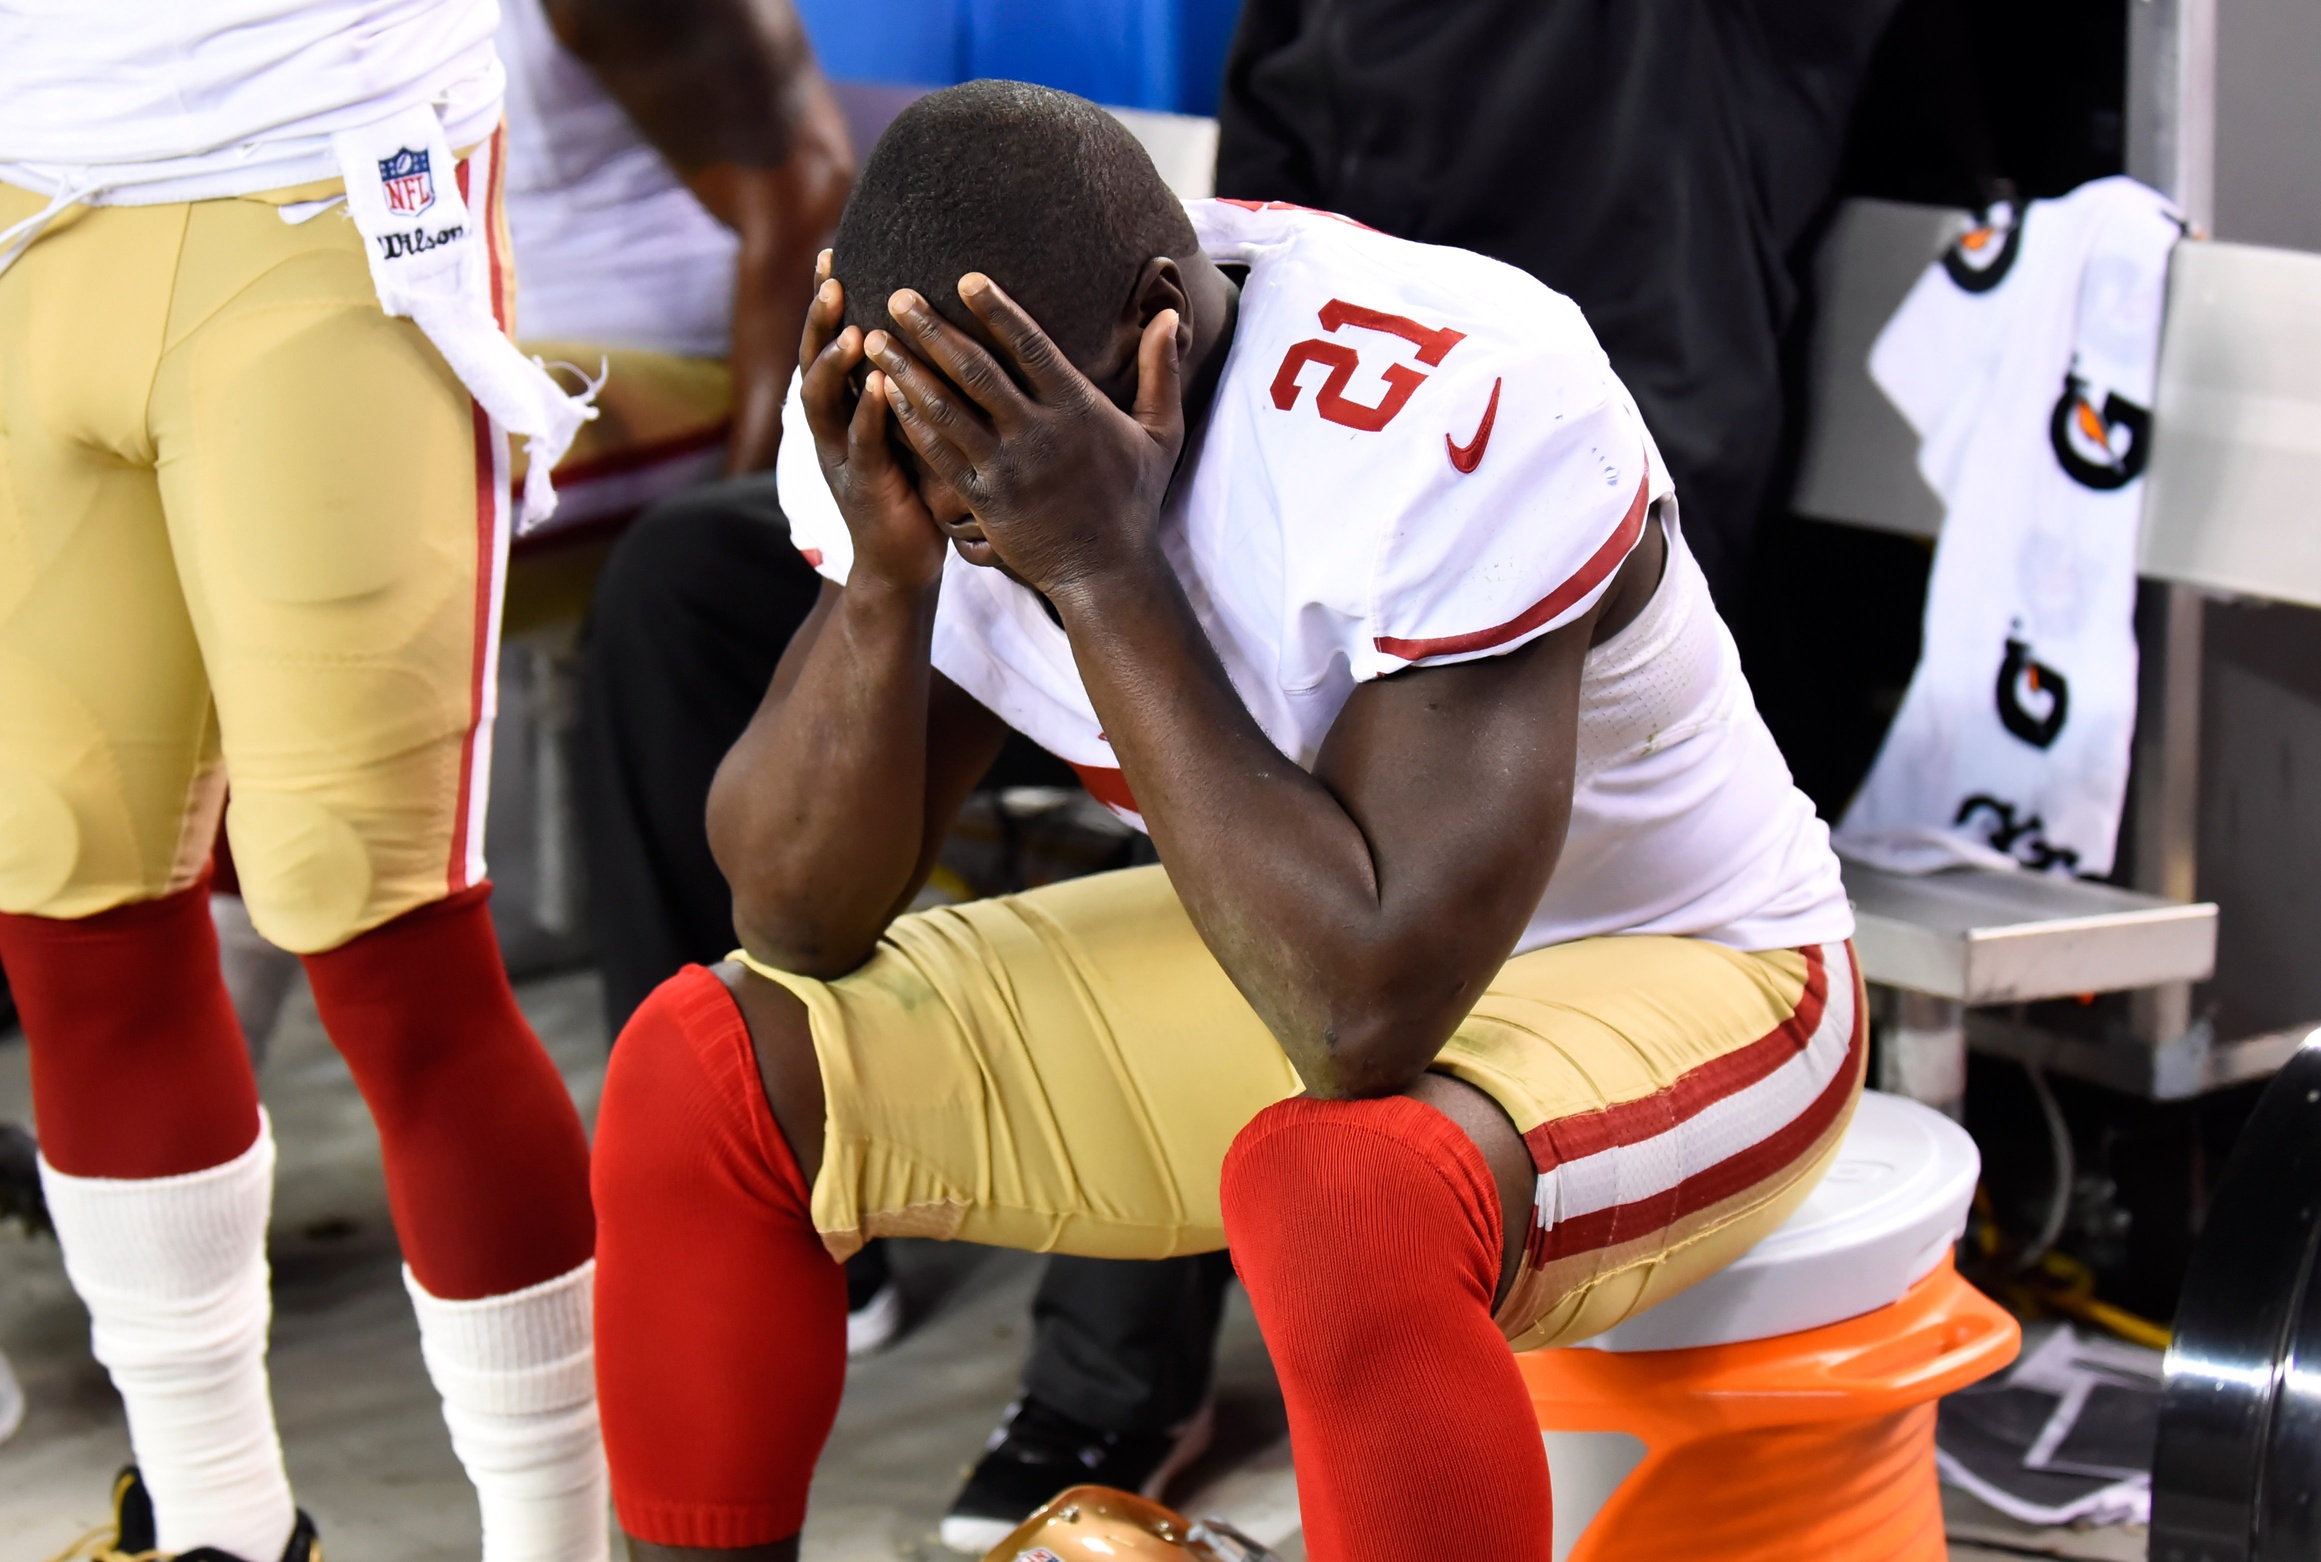 Courtesy of USA Today: In a season full of turmoil, Sunday night was a low point for the 49ers. 